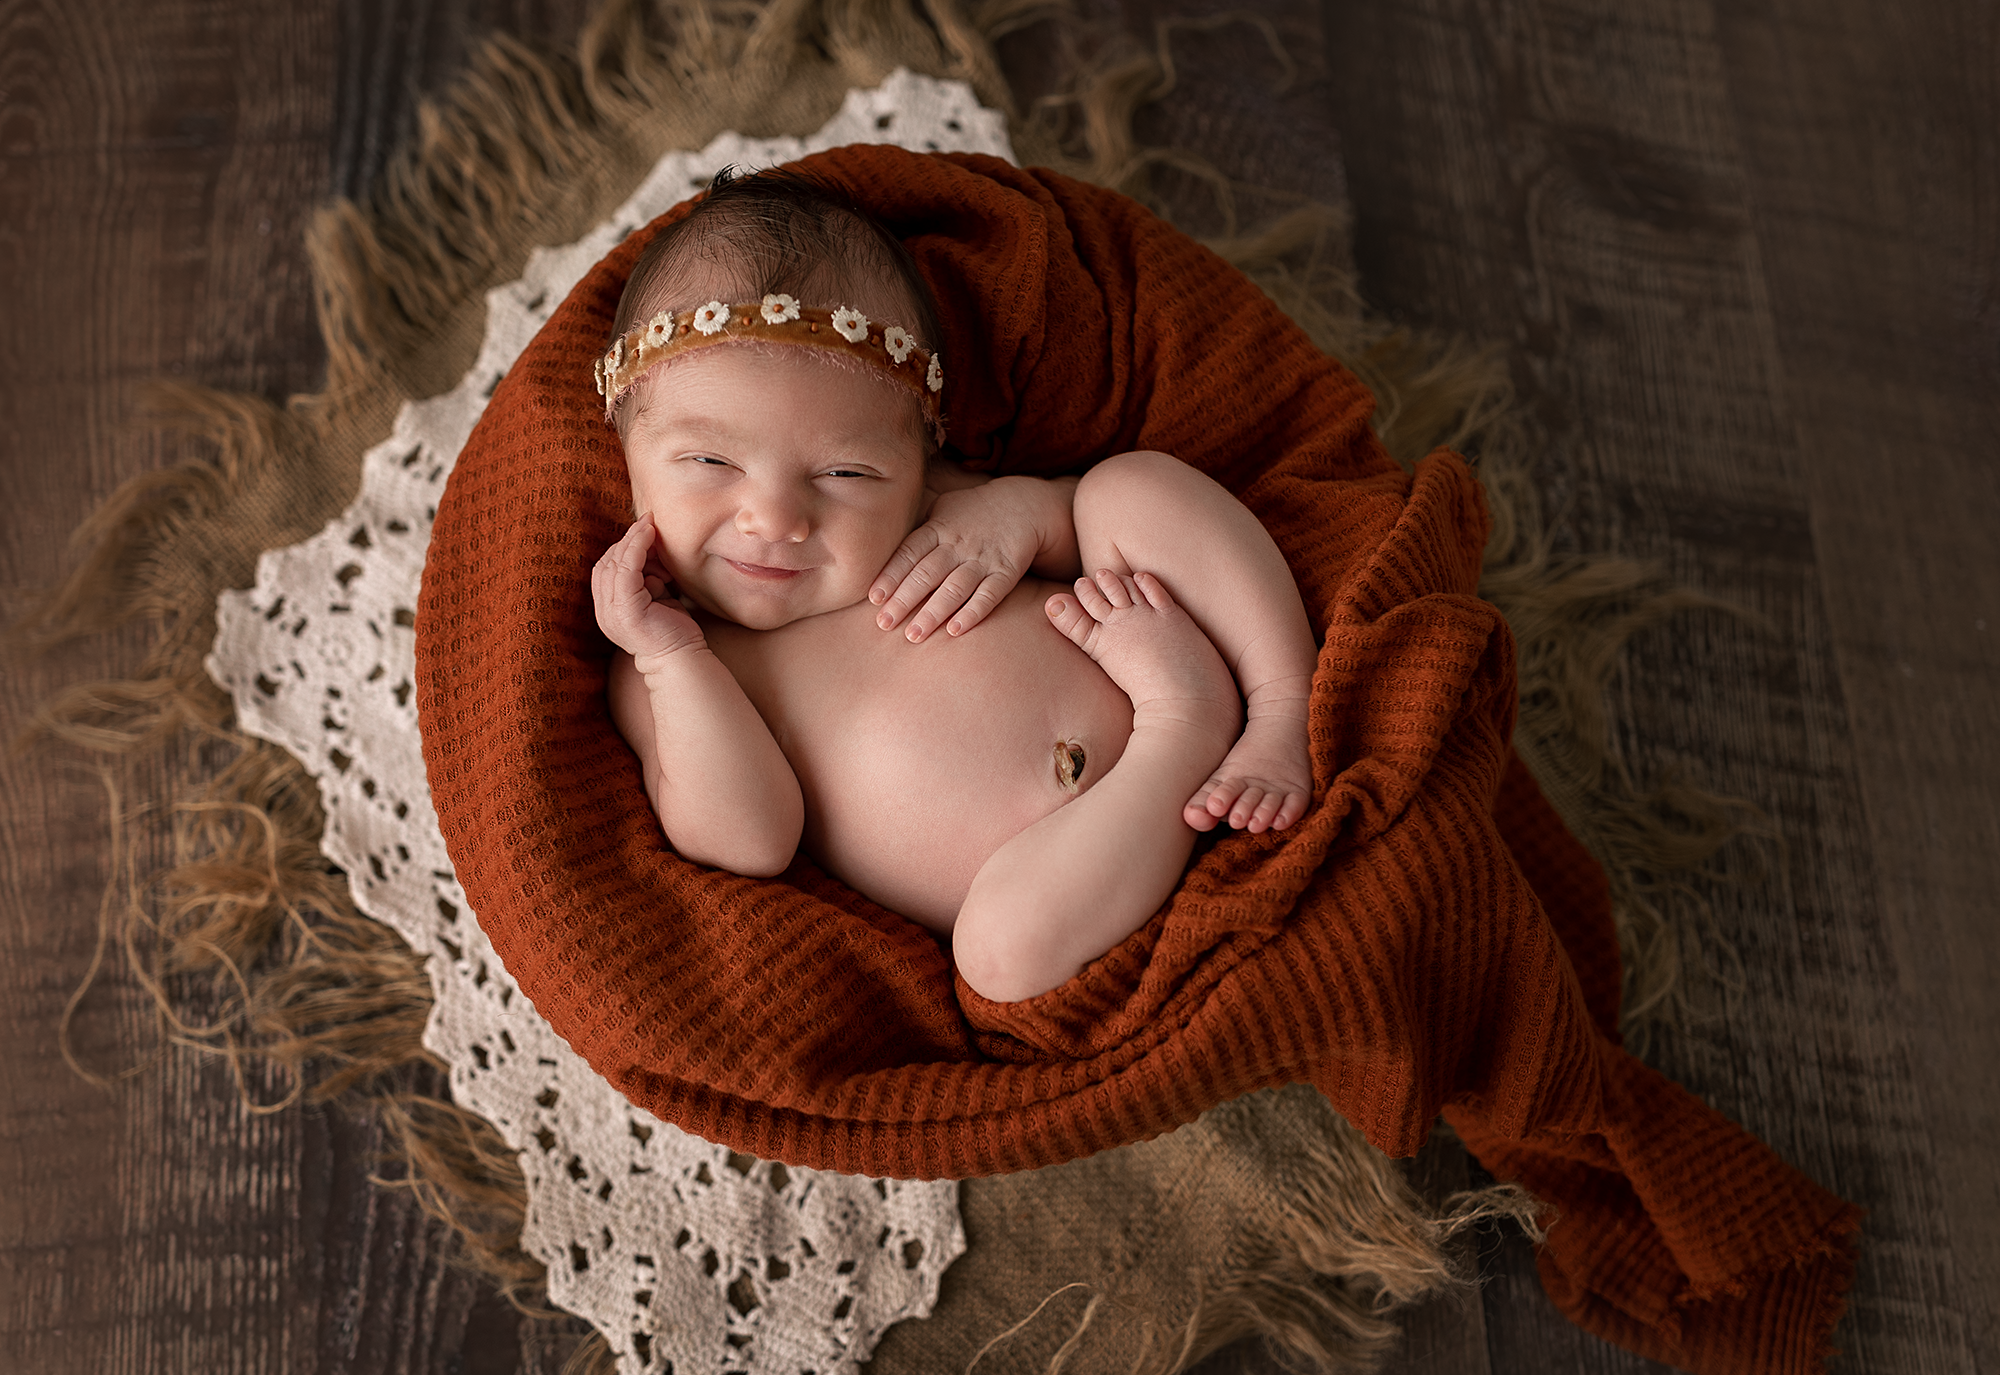 Picture Of A Cute Baby Chilling Like A Queen